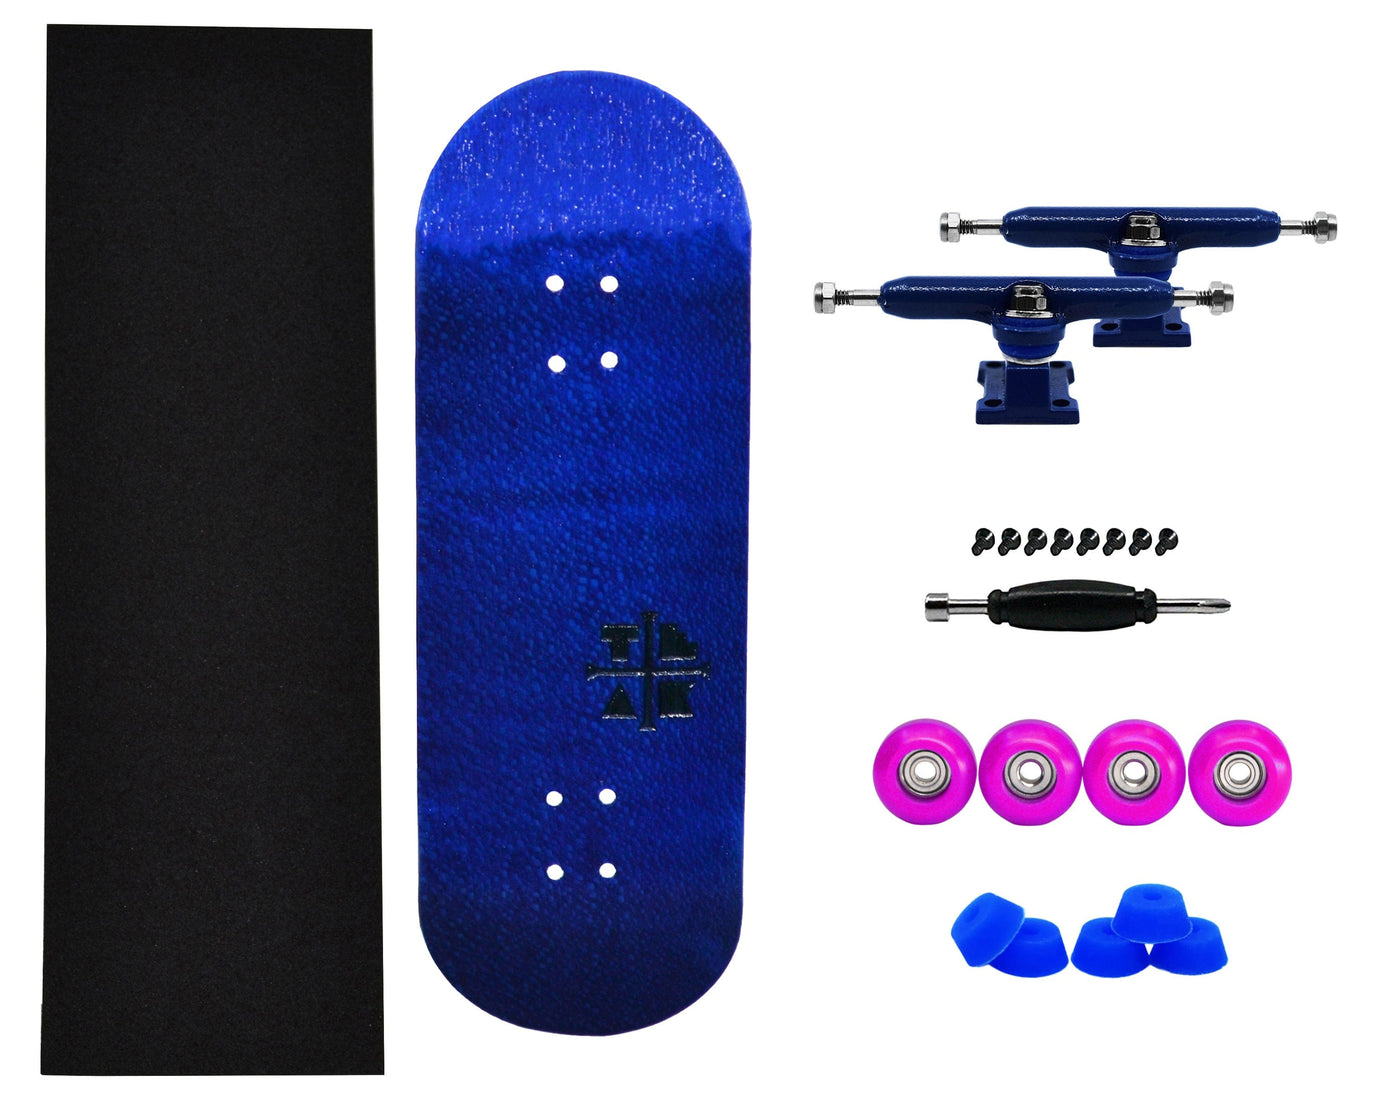 Teak Tuning PROlific Complete with Prodigy Trucks - "Blue & Pink" Edition